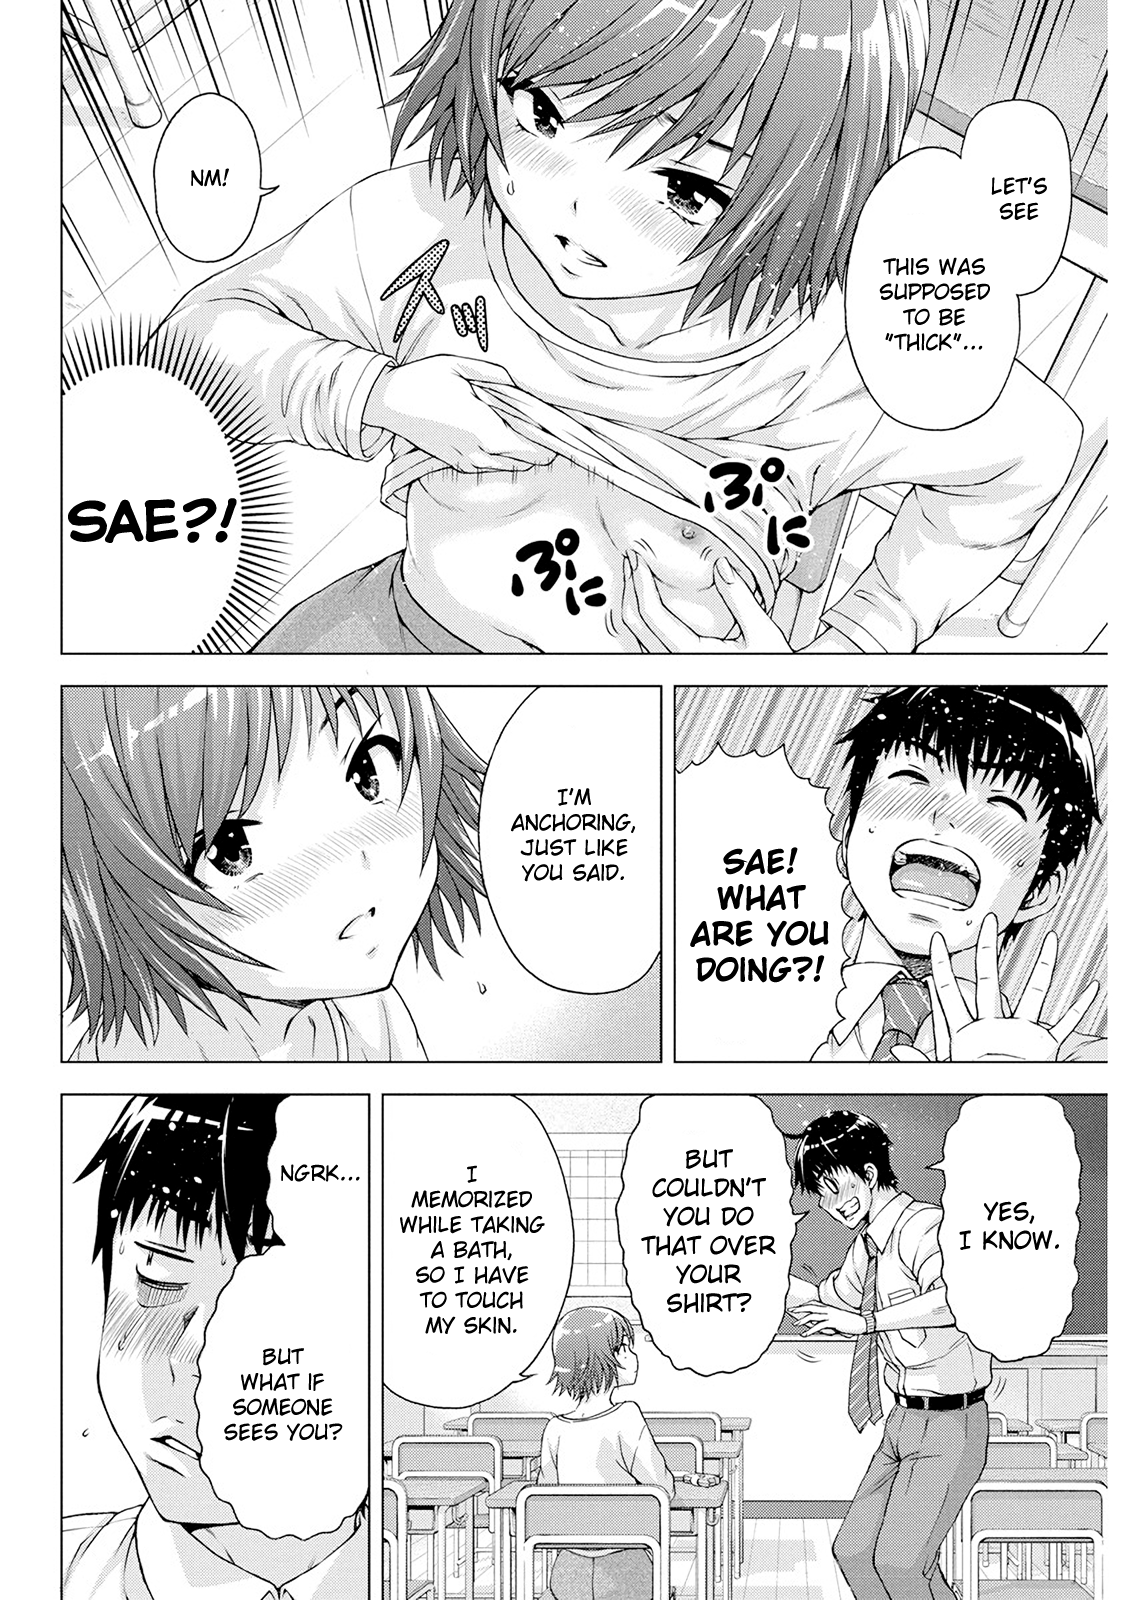 I'm Not A Lolicon! Vol.2 Chapter 9